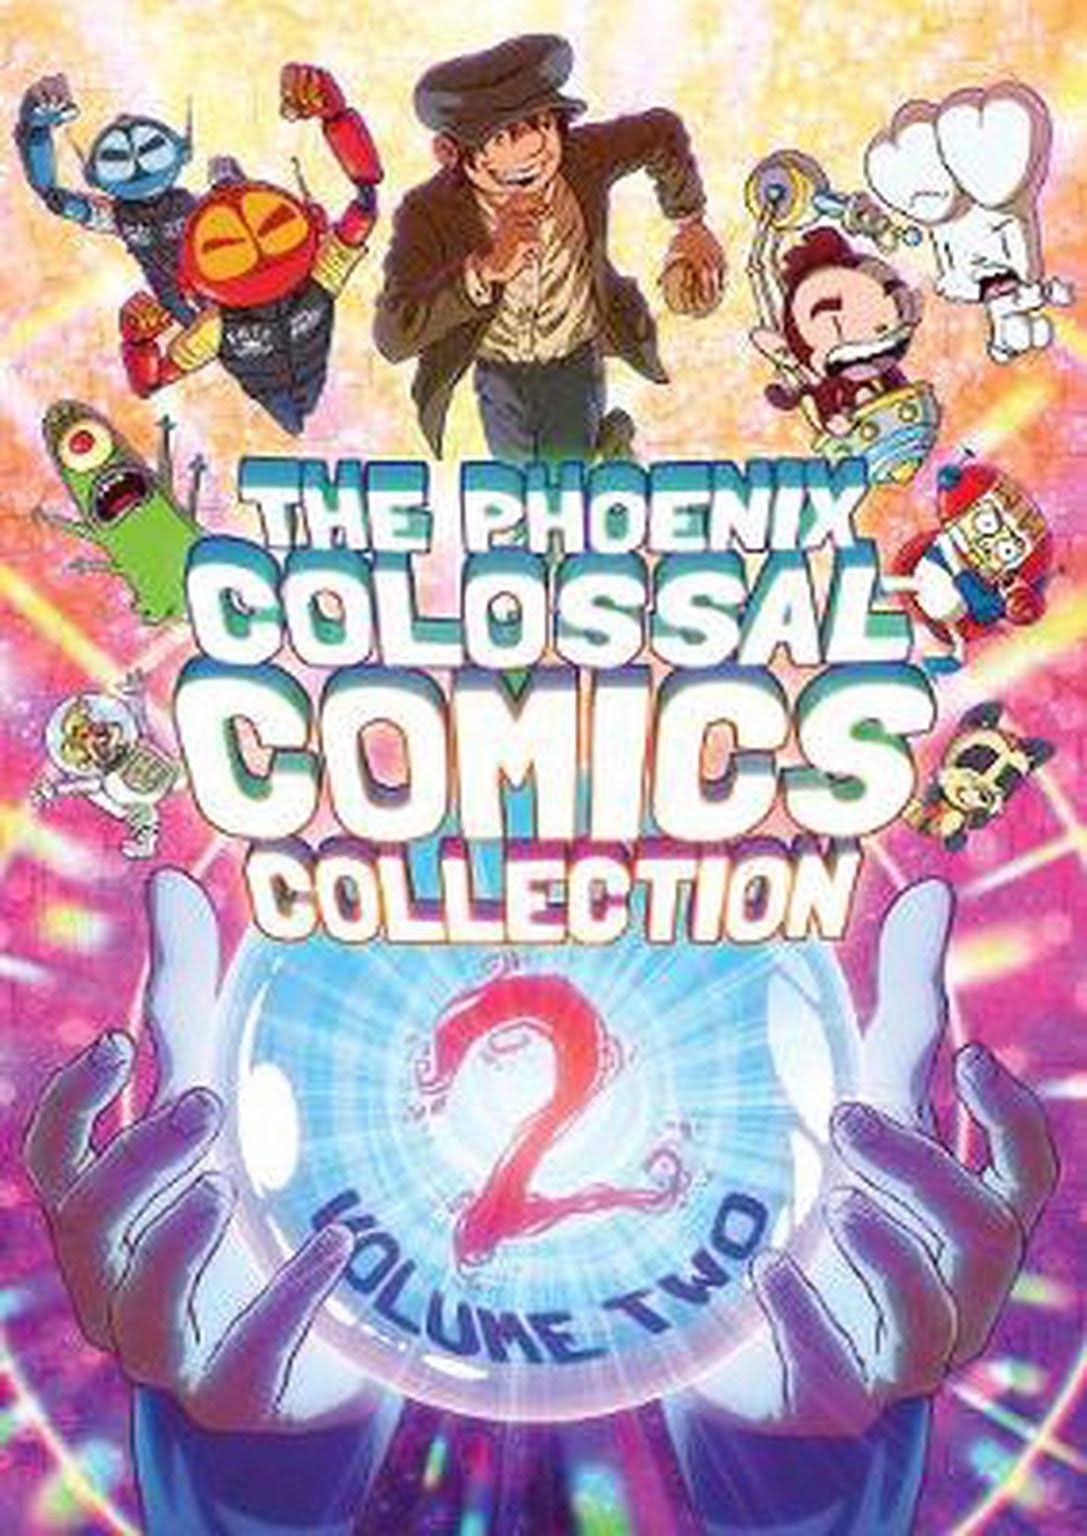 The Phoenix Colossal Comics Collection: Volume Two